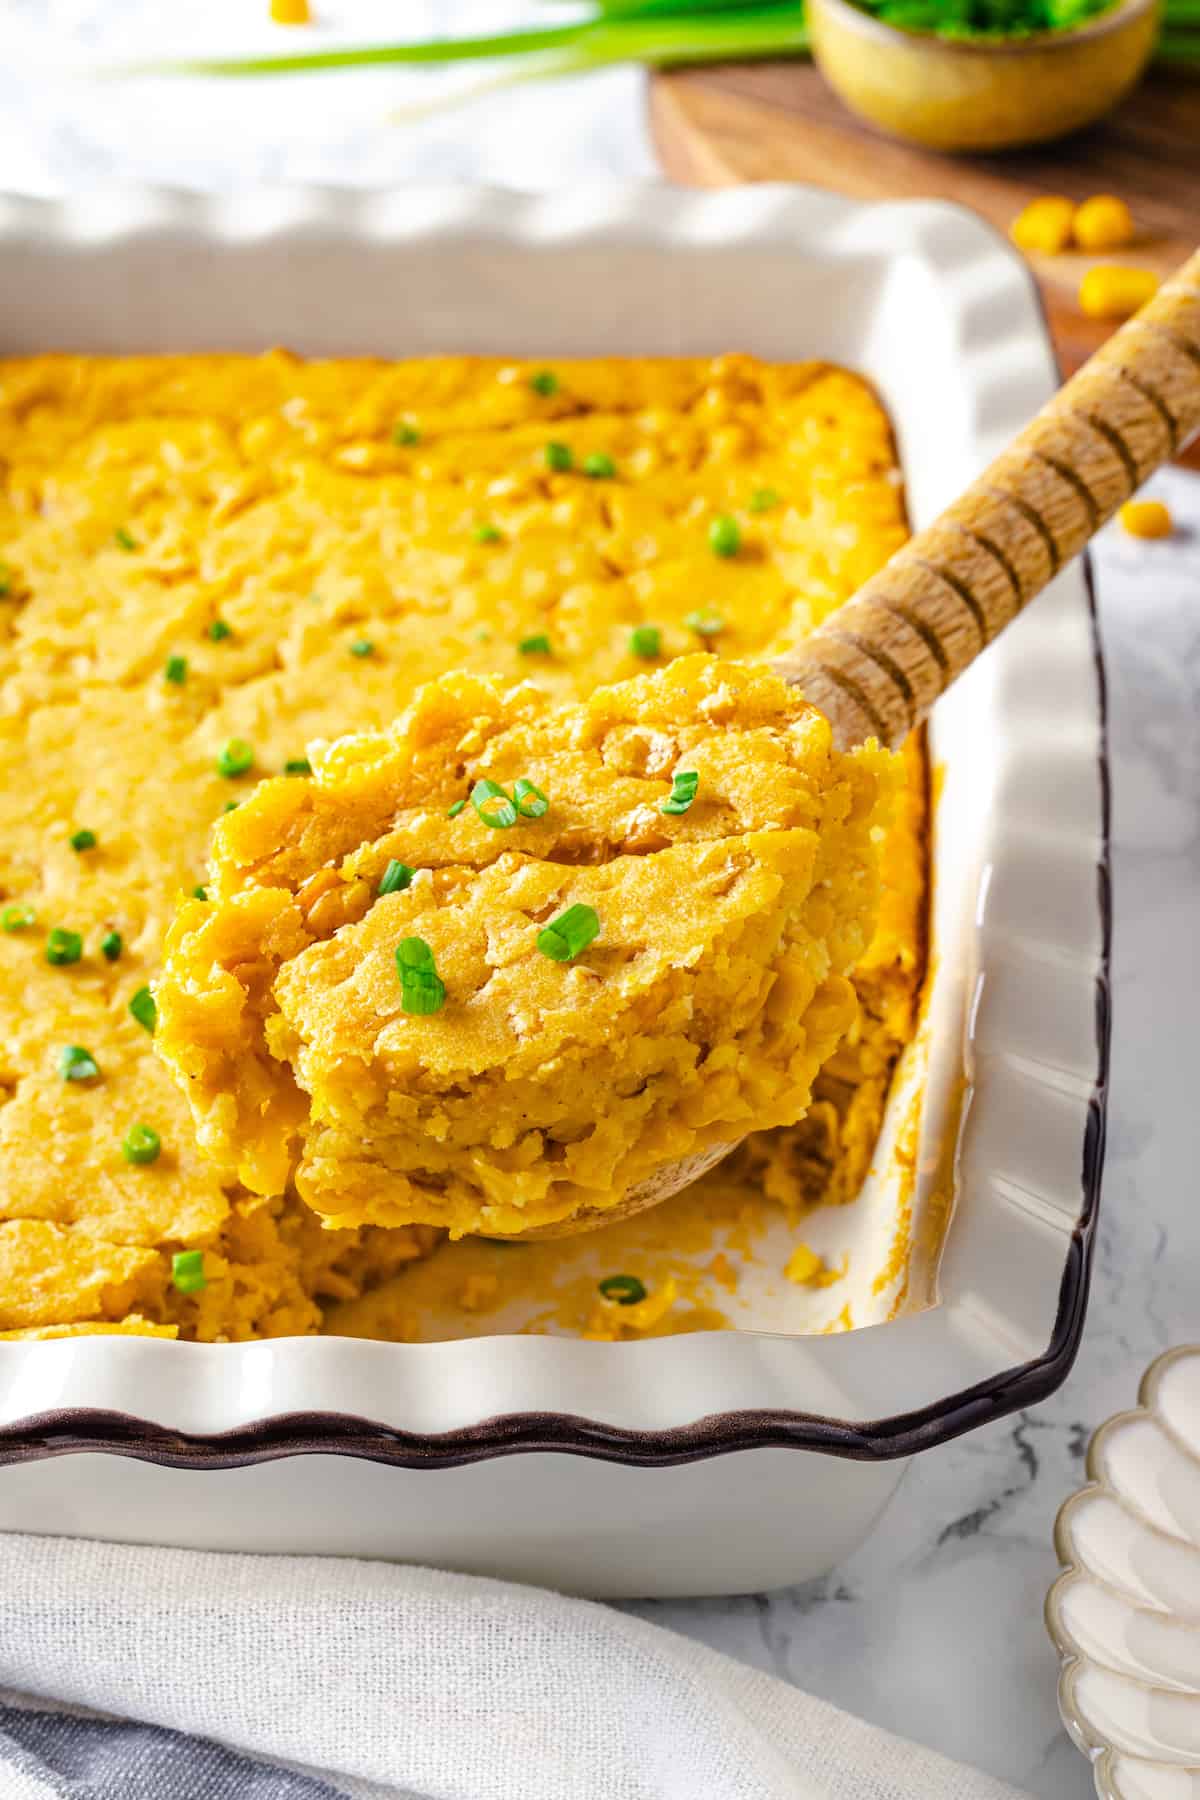 Vegan cornbread pudding being scooped from casserole dish